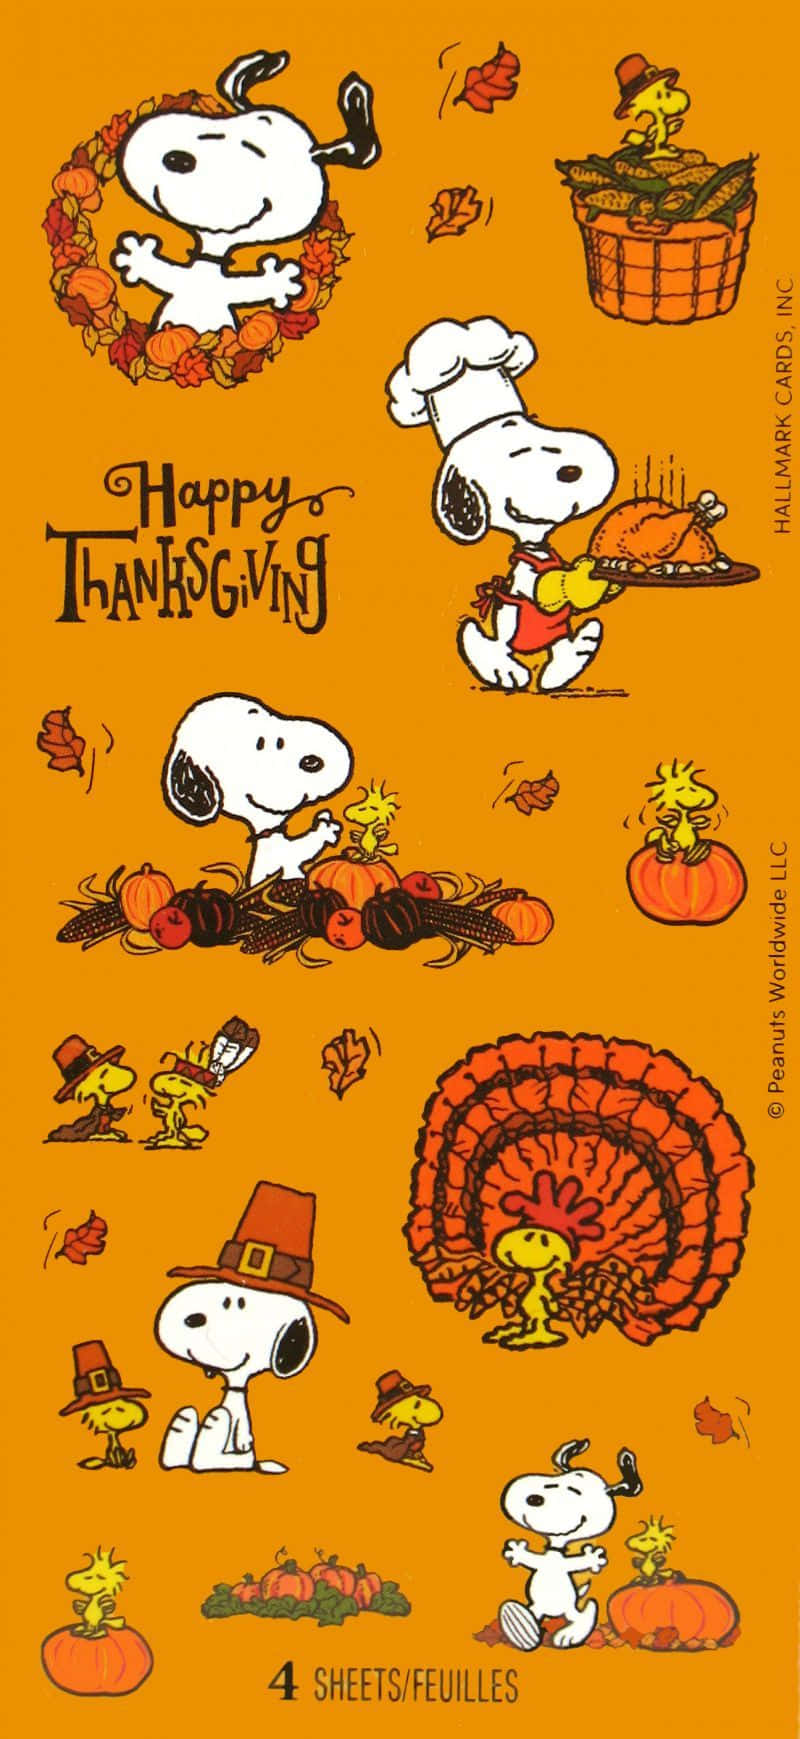 Snoopy Celebrates Thanksgiving With Family And Friends Background